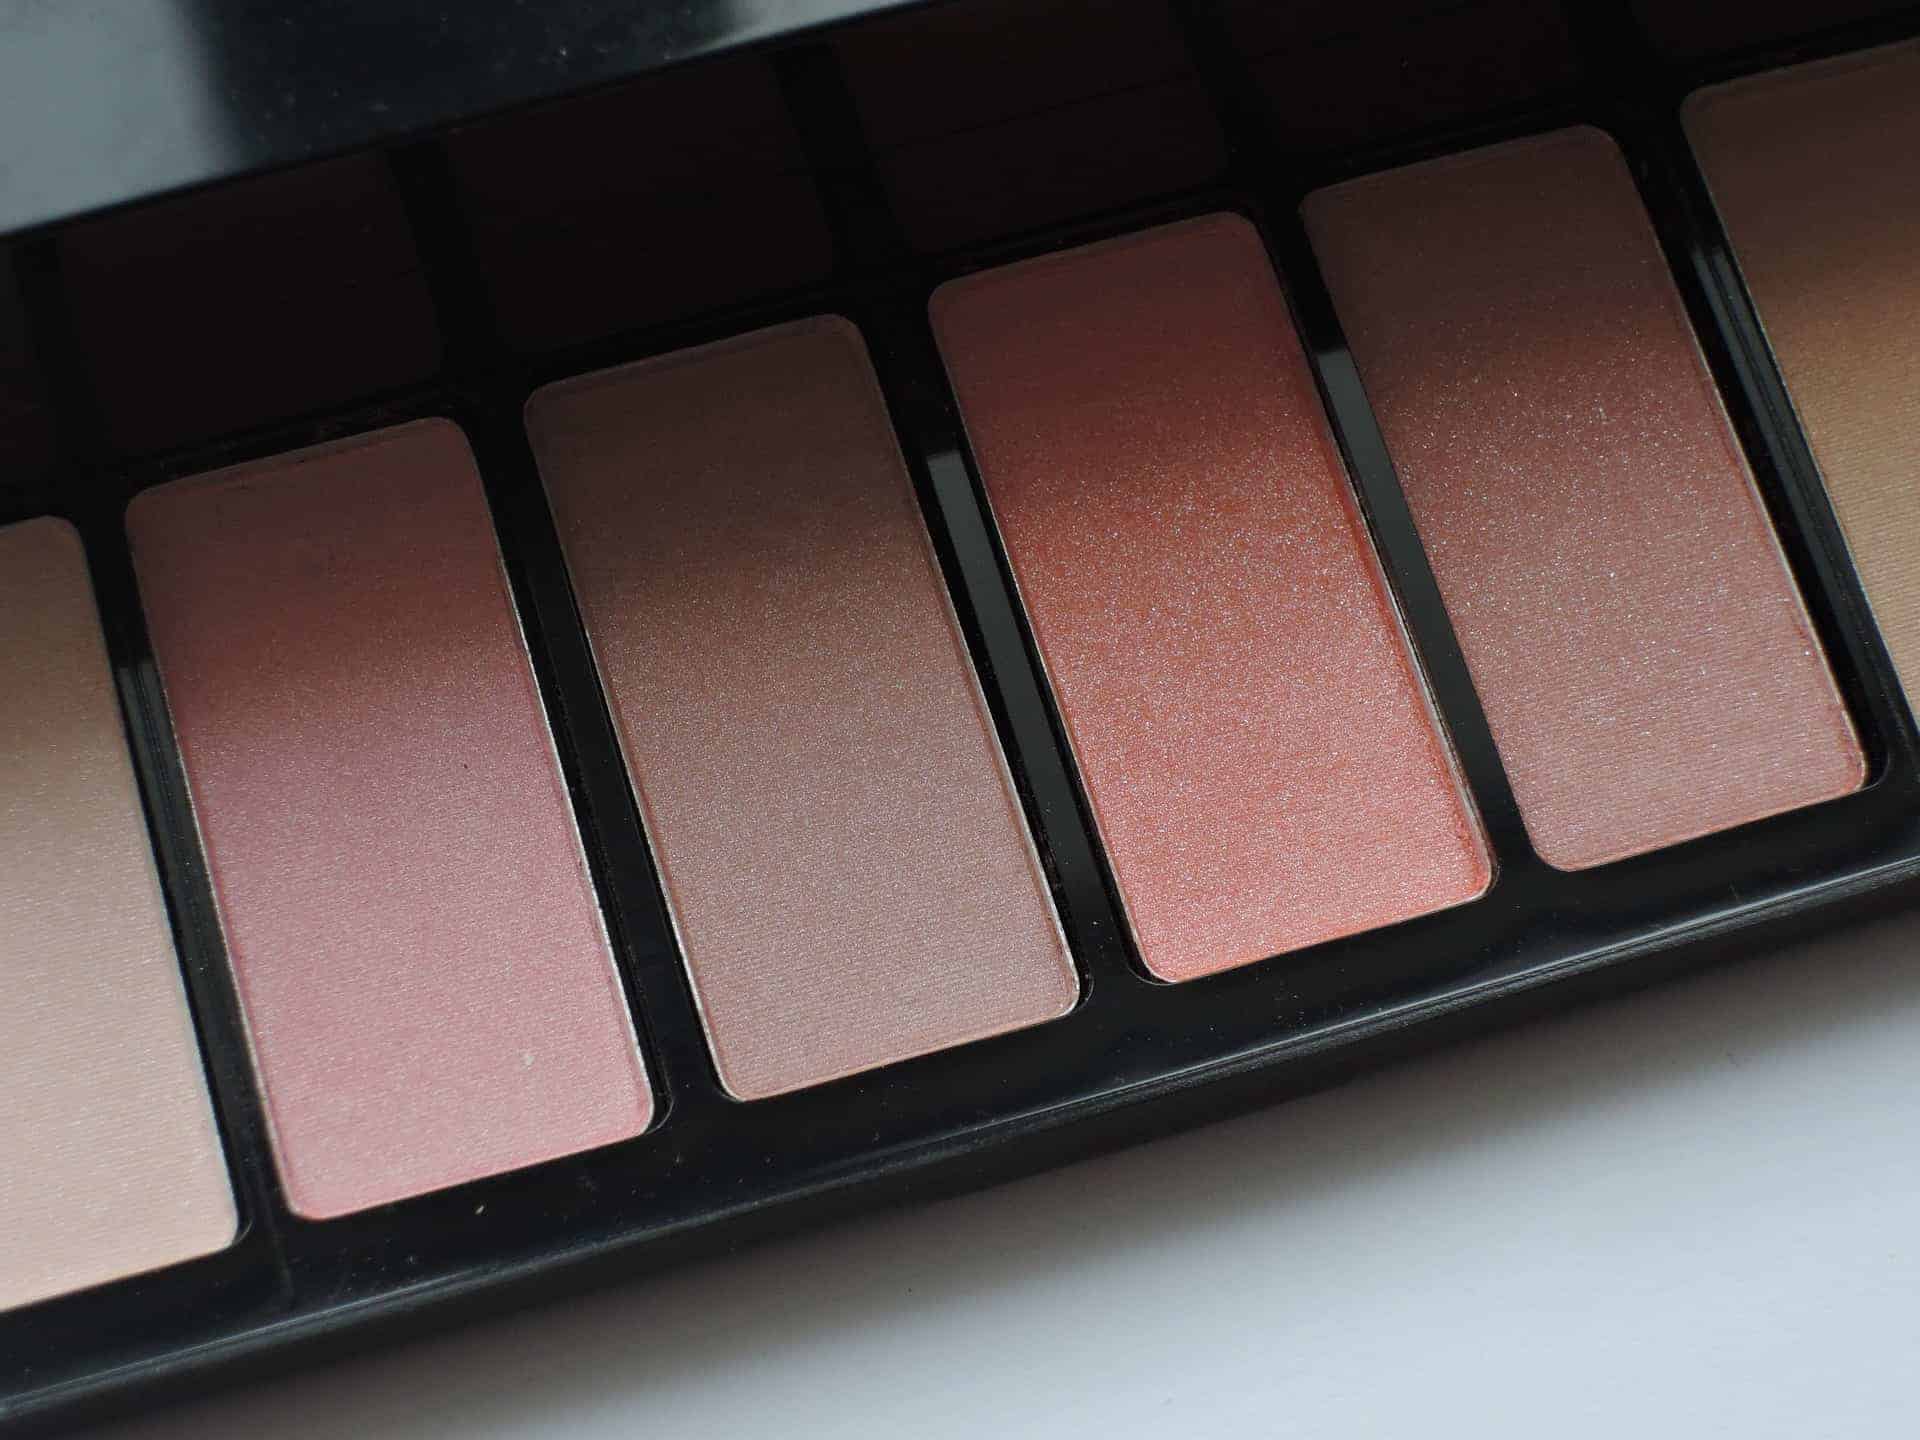 The Best Makeup Palettes for Travel